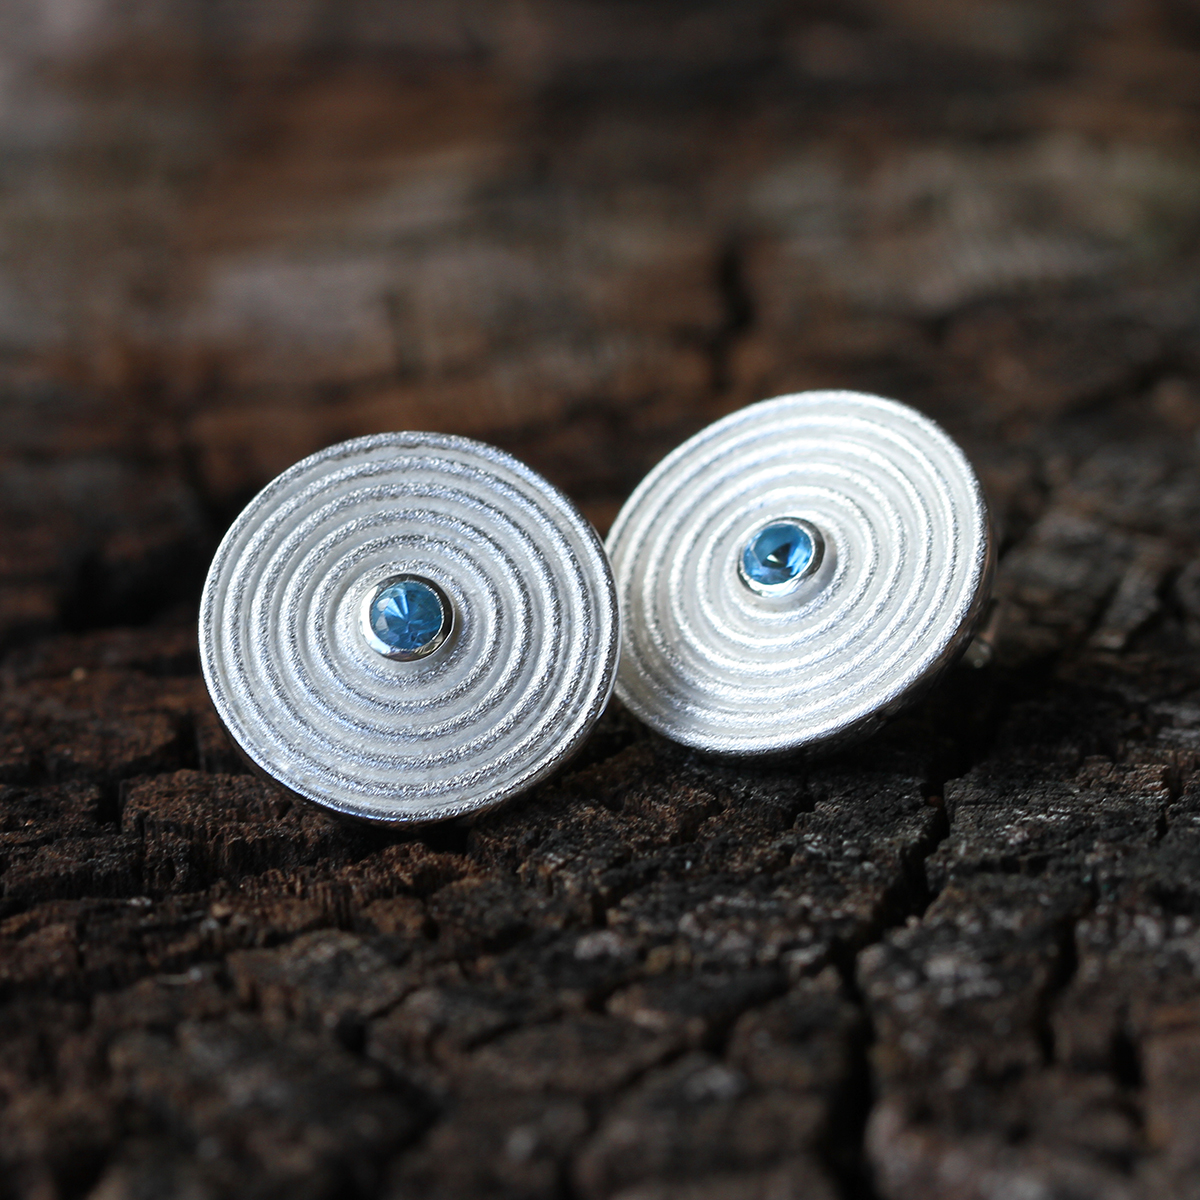 Disc shaped earrings in sterling silver with circular rills originating from Blue stones at the center towards the edge.